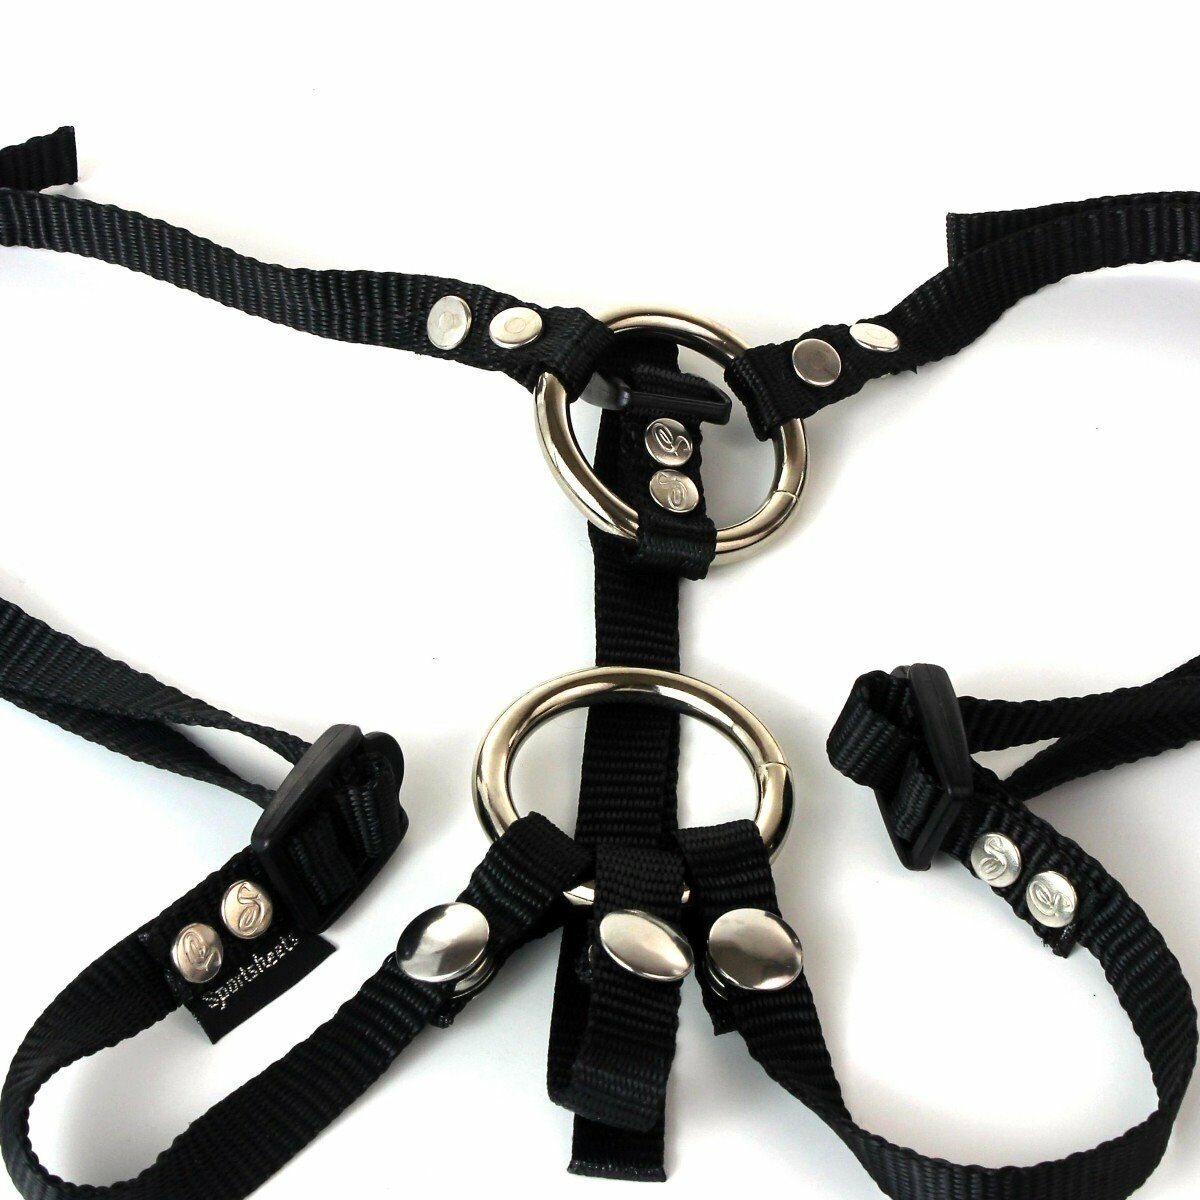 Sportsheets Bare As You Dare Black Strap-on Thong Harness w/ 1.5" O Ring